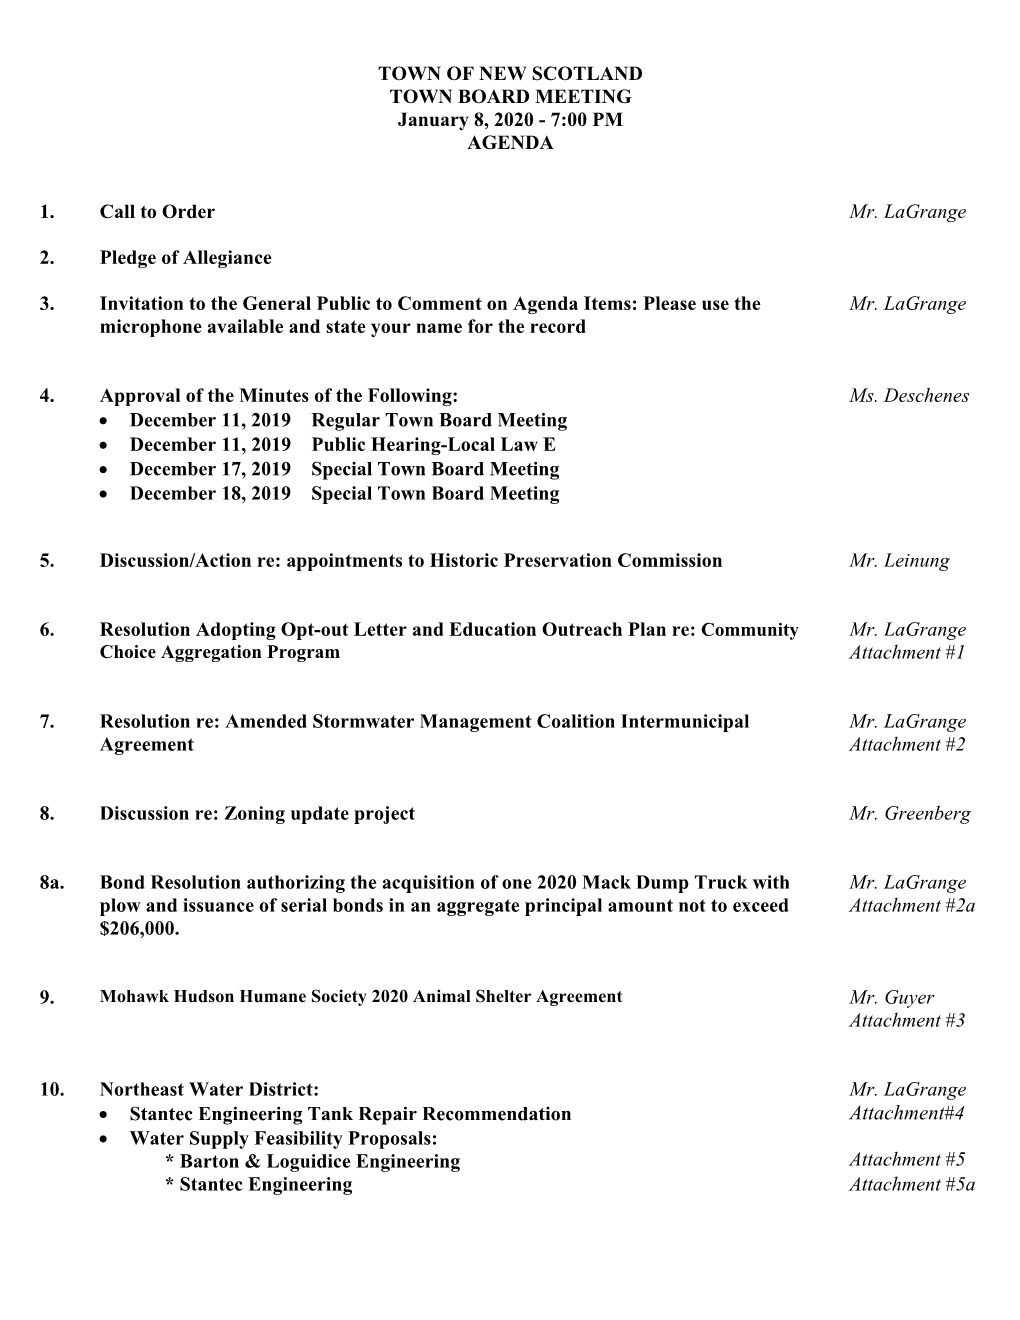 TOWN of NEW SCOTLAND TOWN BOARD MEETING January 8, 2020 - 7:00 PM AGENDA